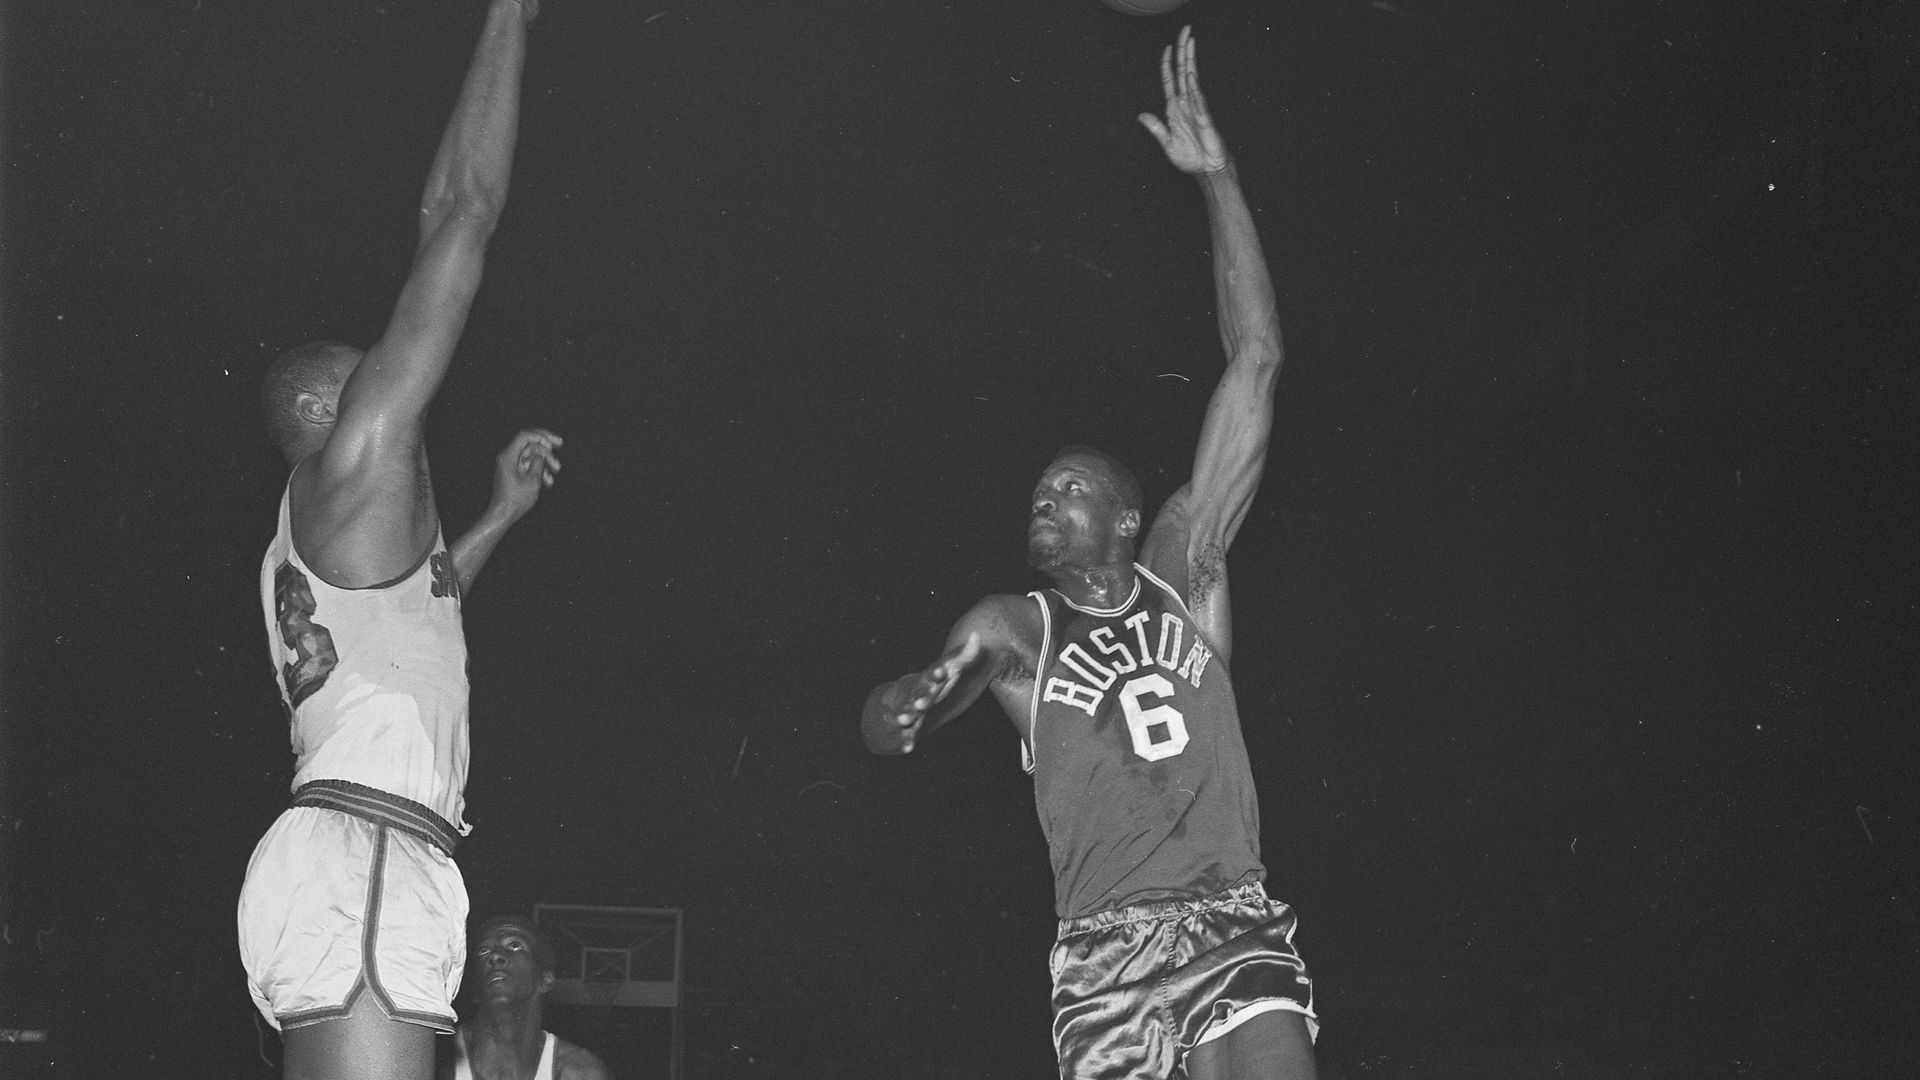 Wilt Chamberlain and Bill Russell in an NBA game from 1964.